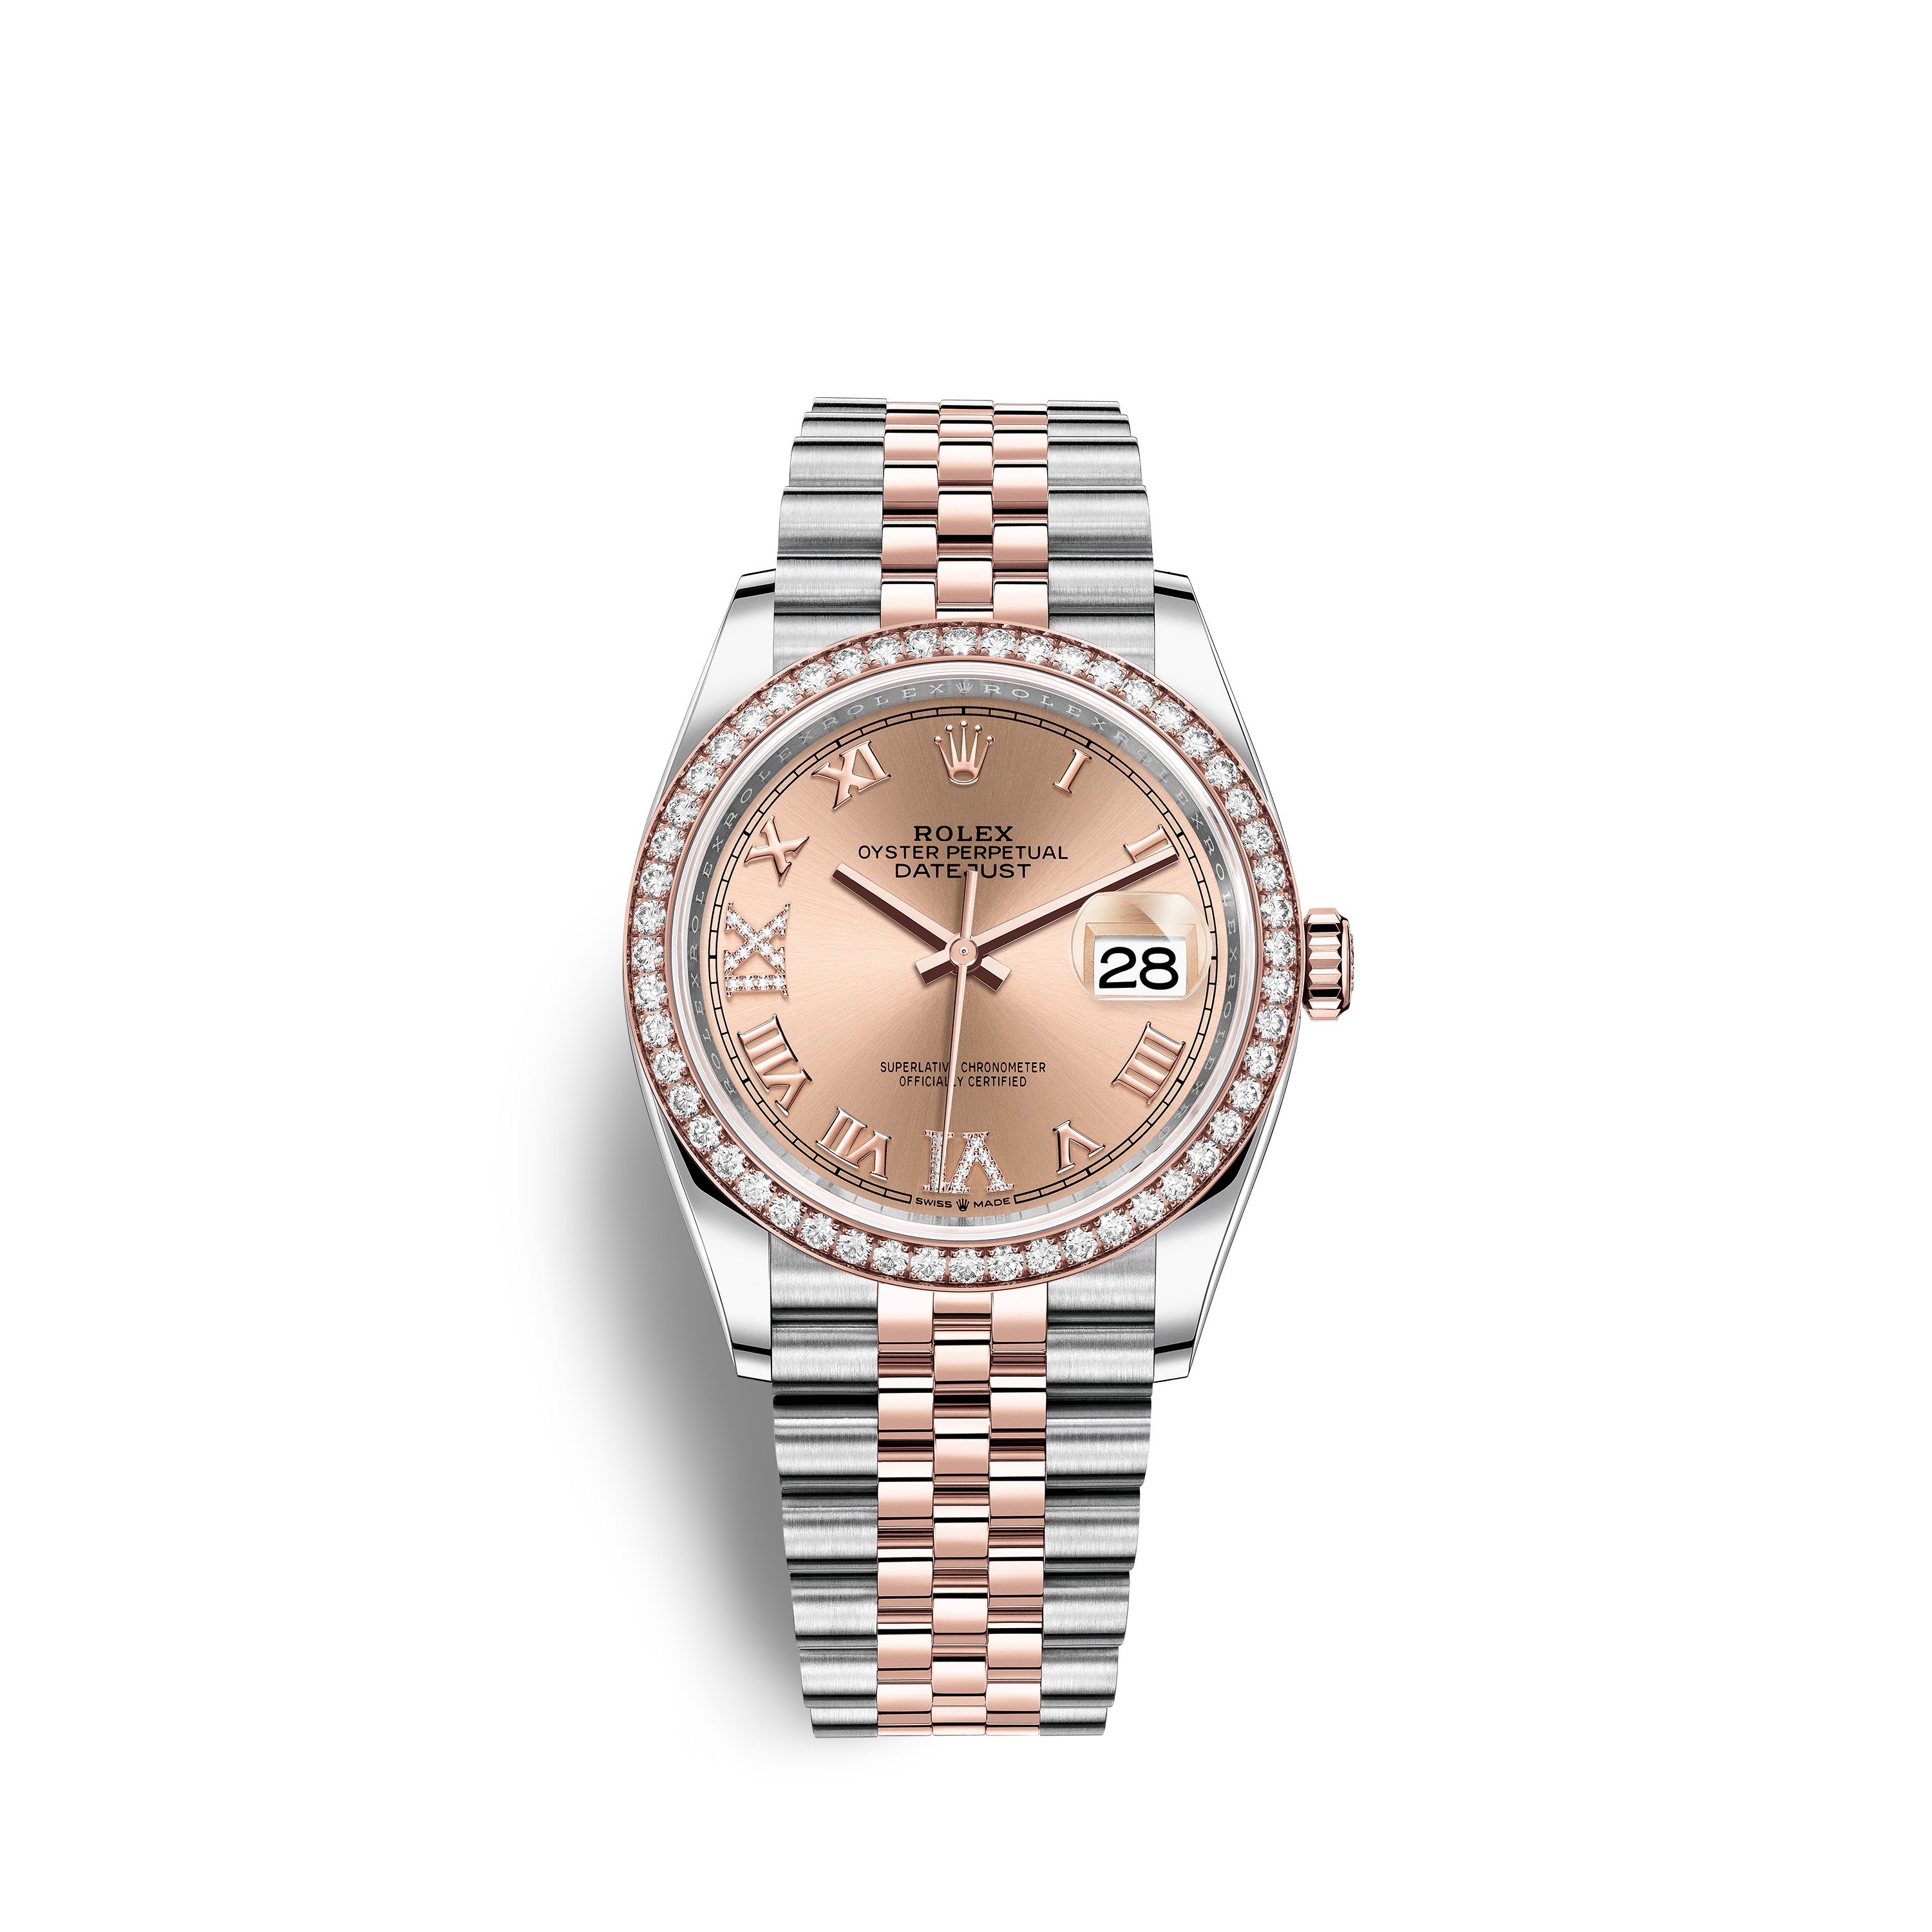 Datejust 36 126281RBR Rose Gold & Stainless Steel Watch (Rose Set with Diamonds)